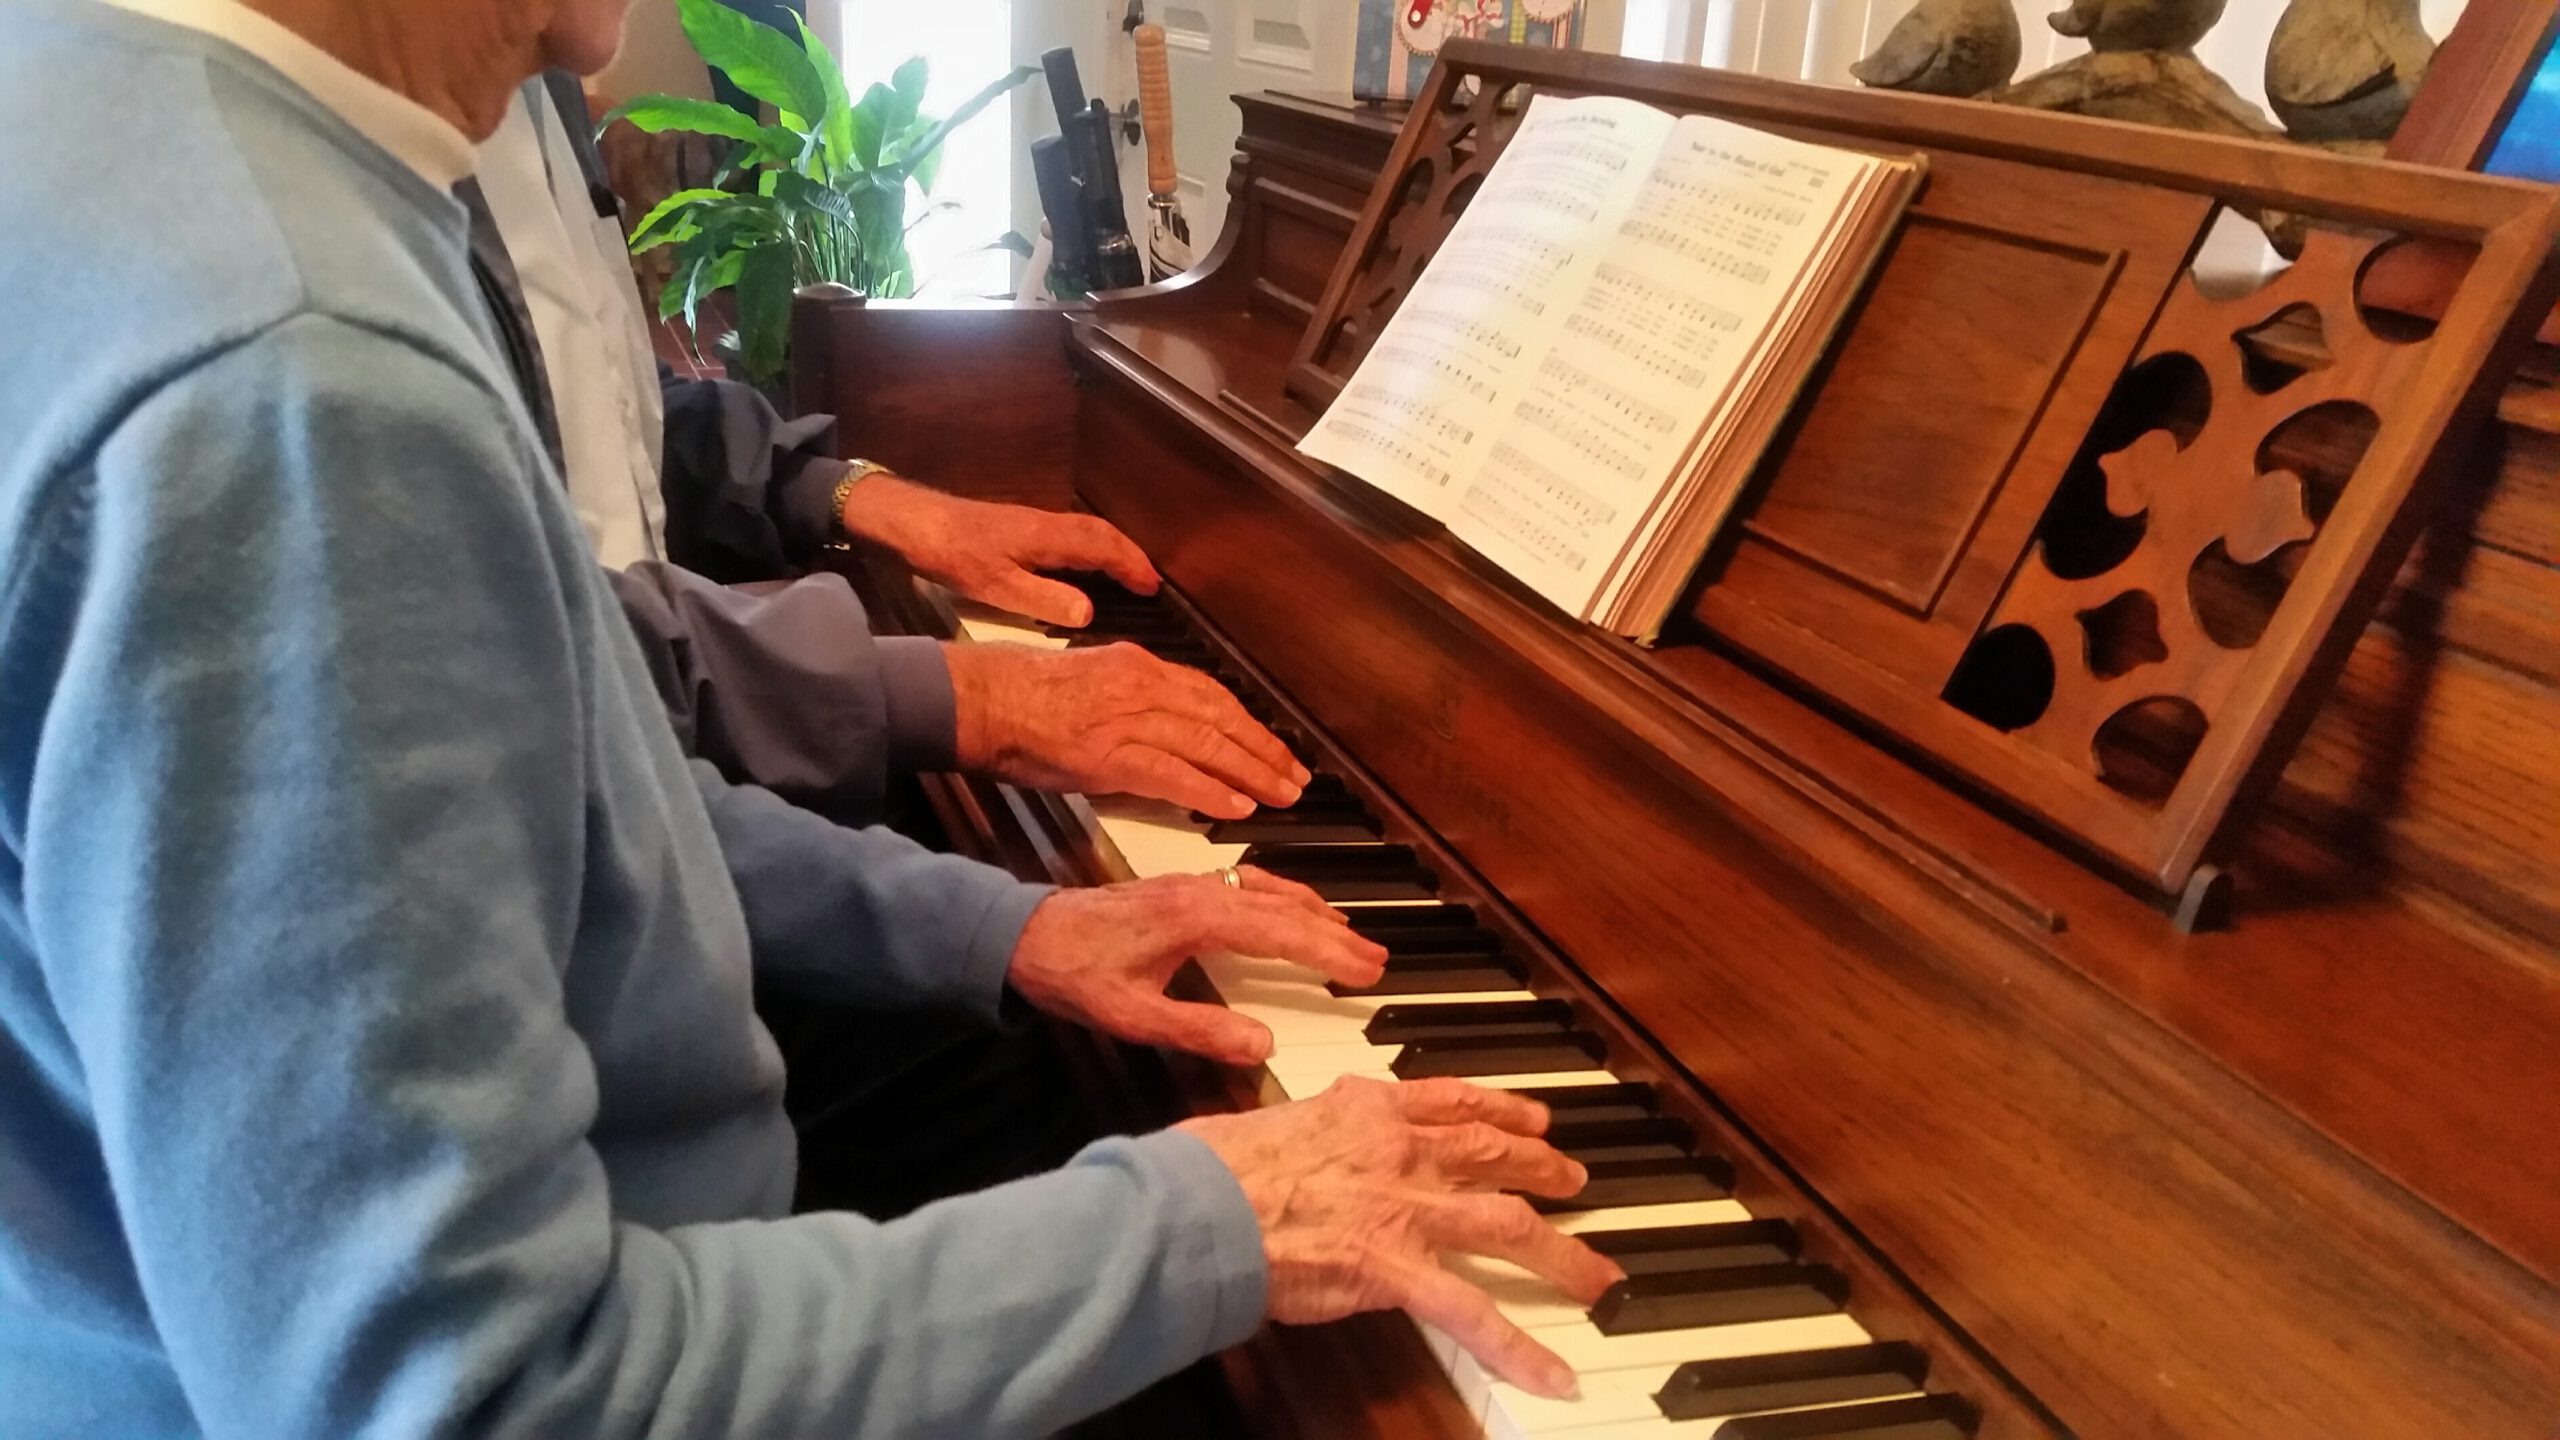 hands-on-piano-playing-music-together-as-seniors-v-ASHZ3LS